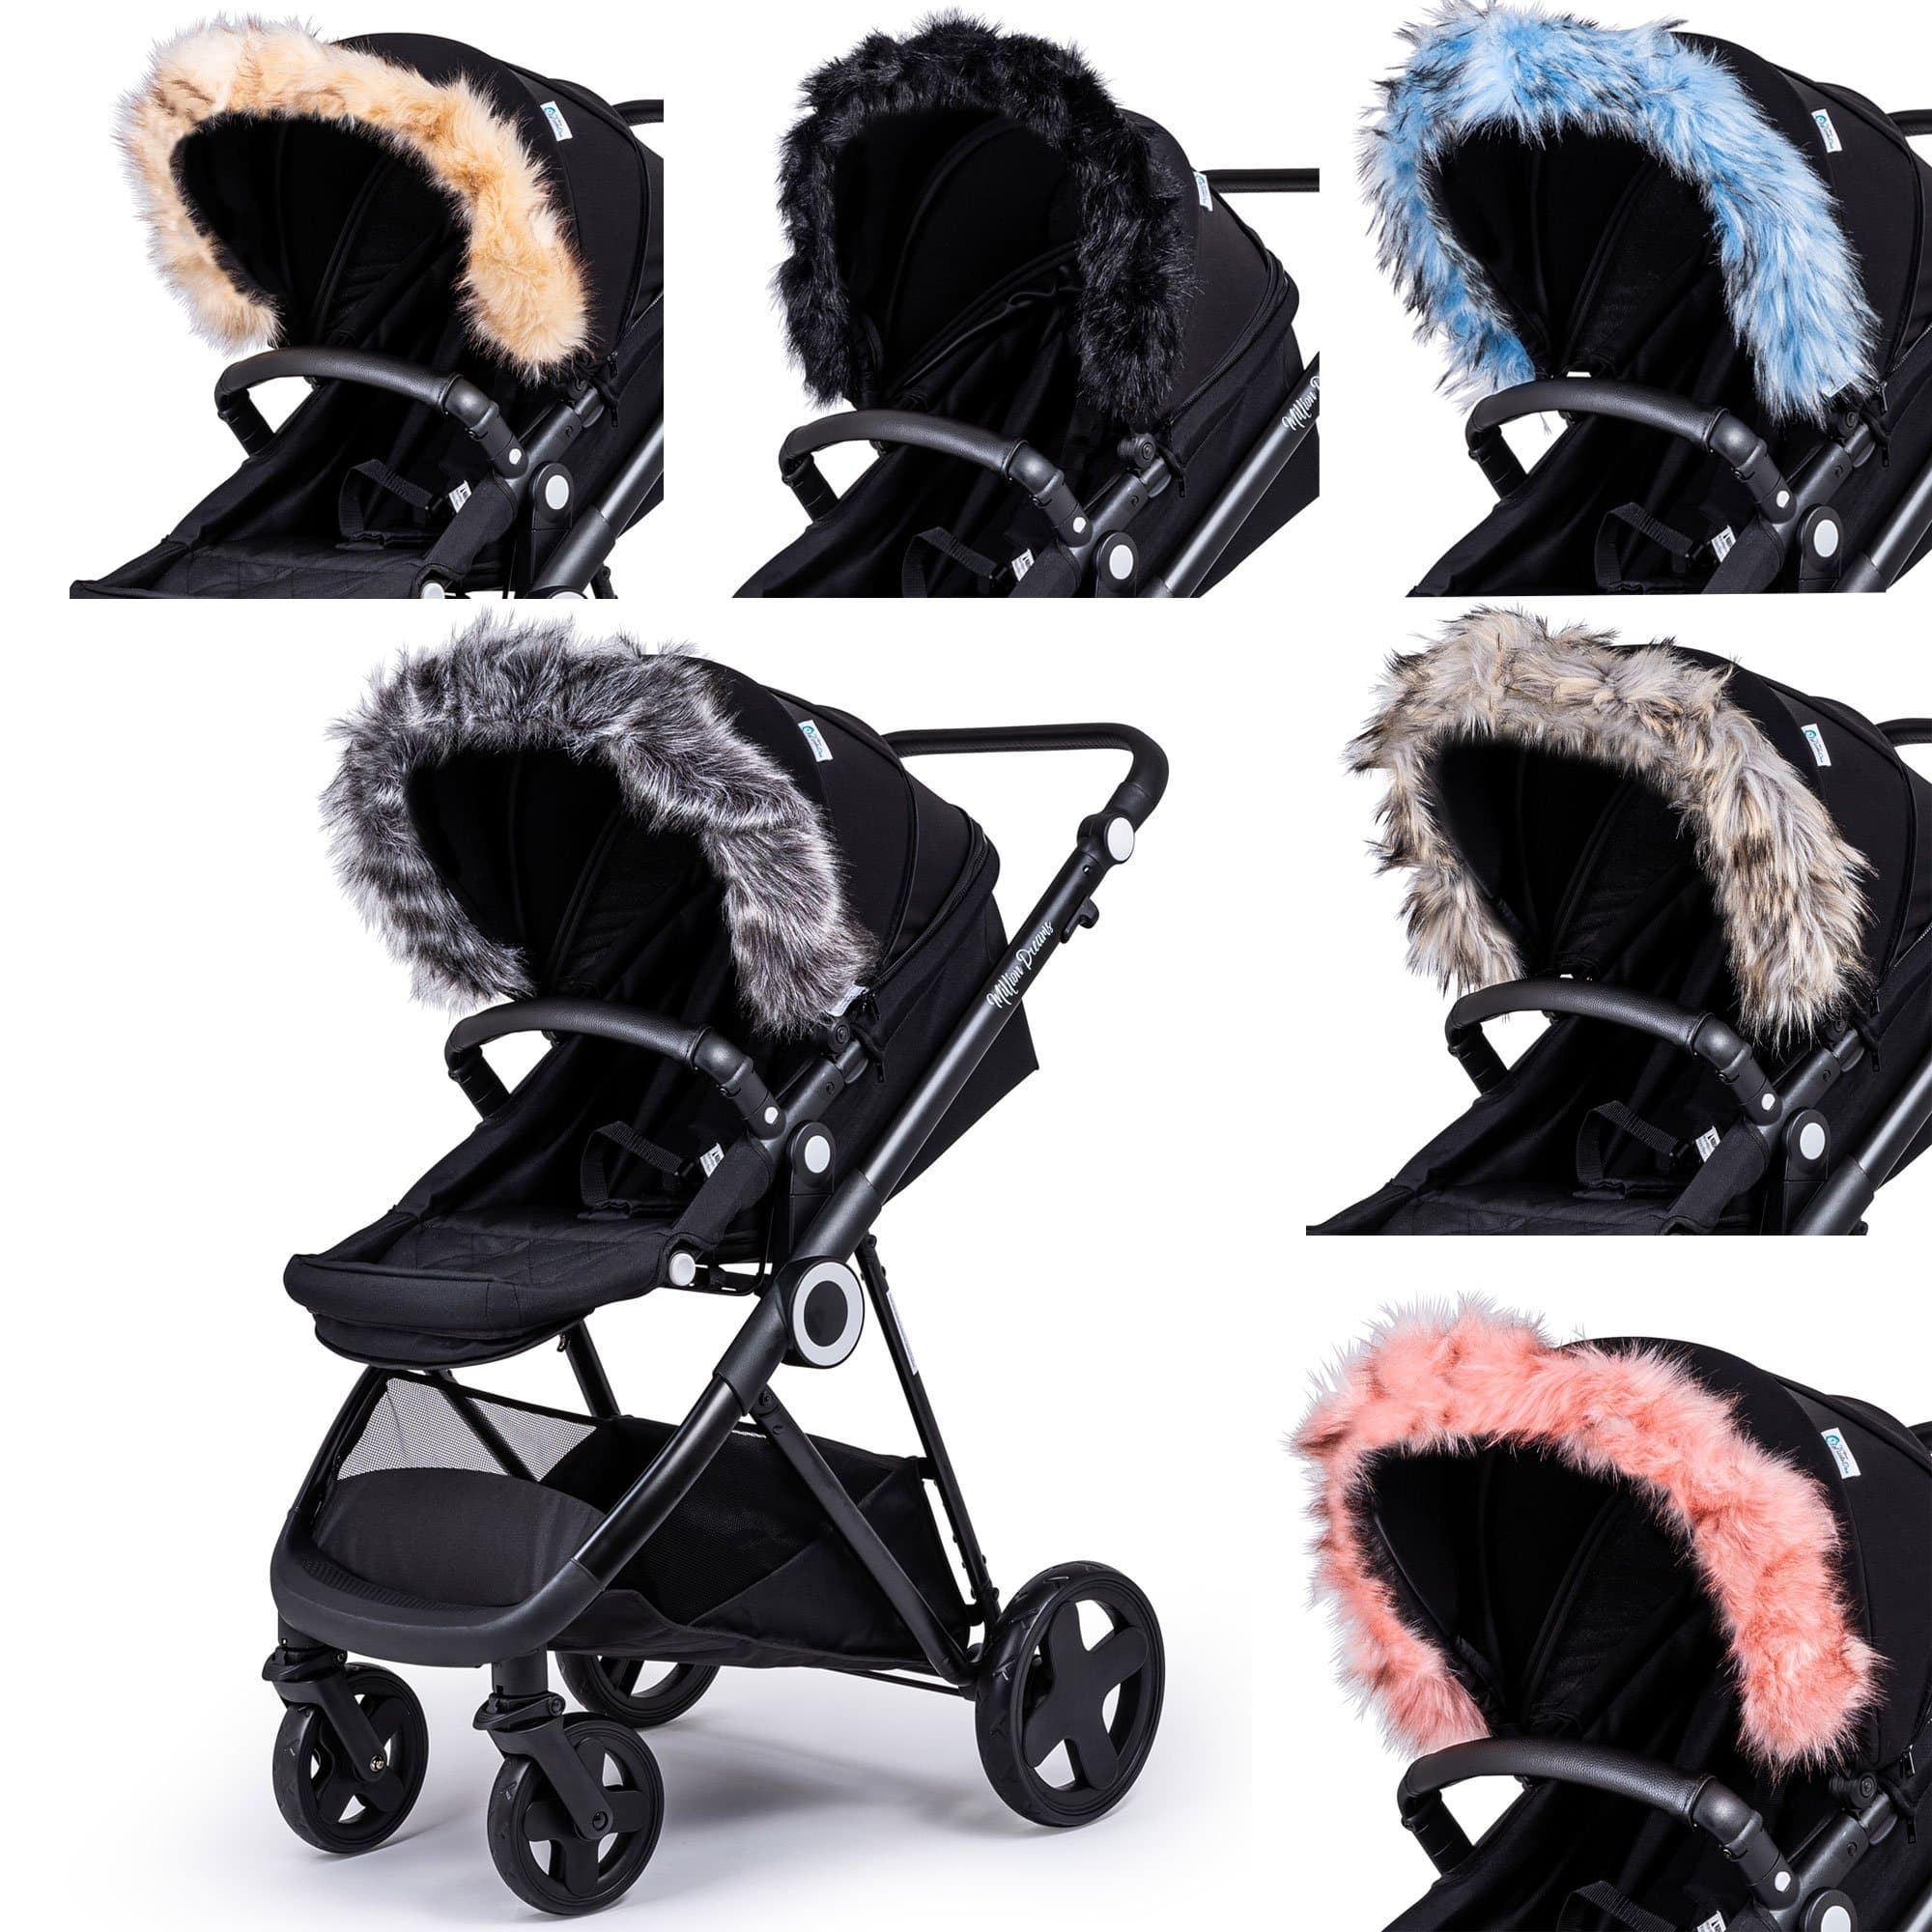 Pram Fur Hood Trim Attachment for Pushchair Compatible with Red Kite - For Your Little One